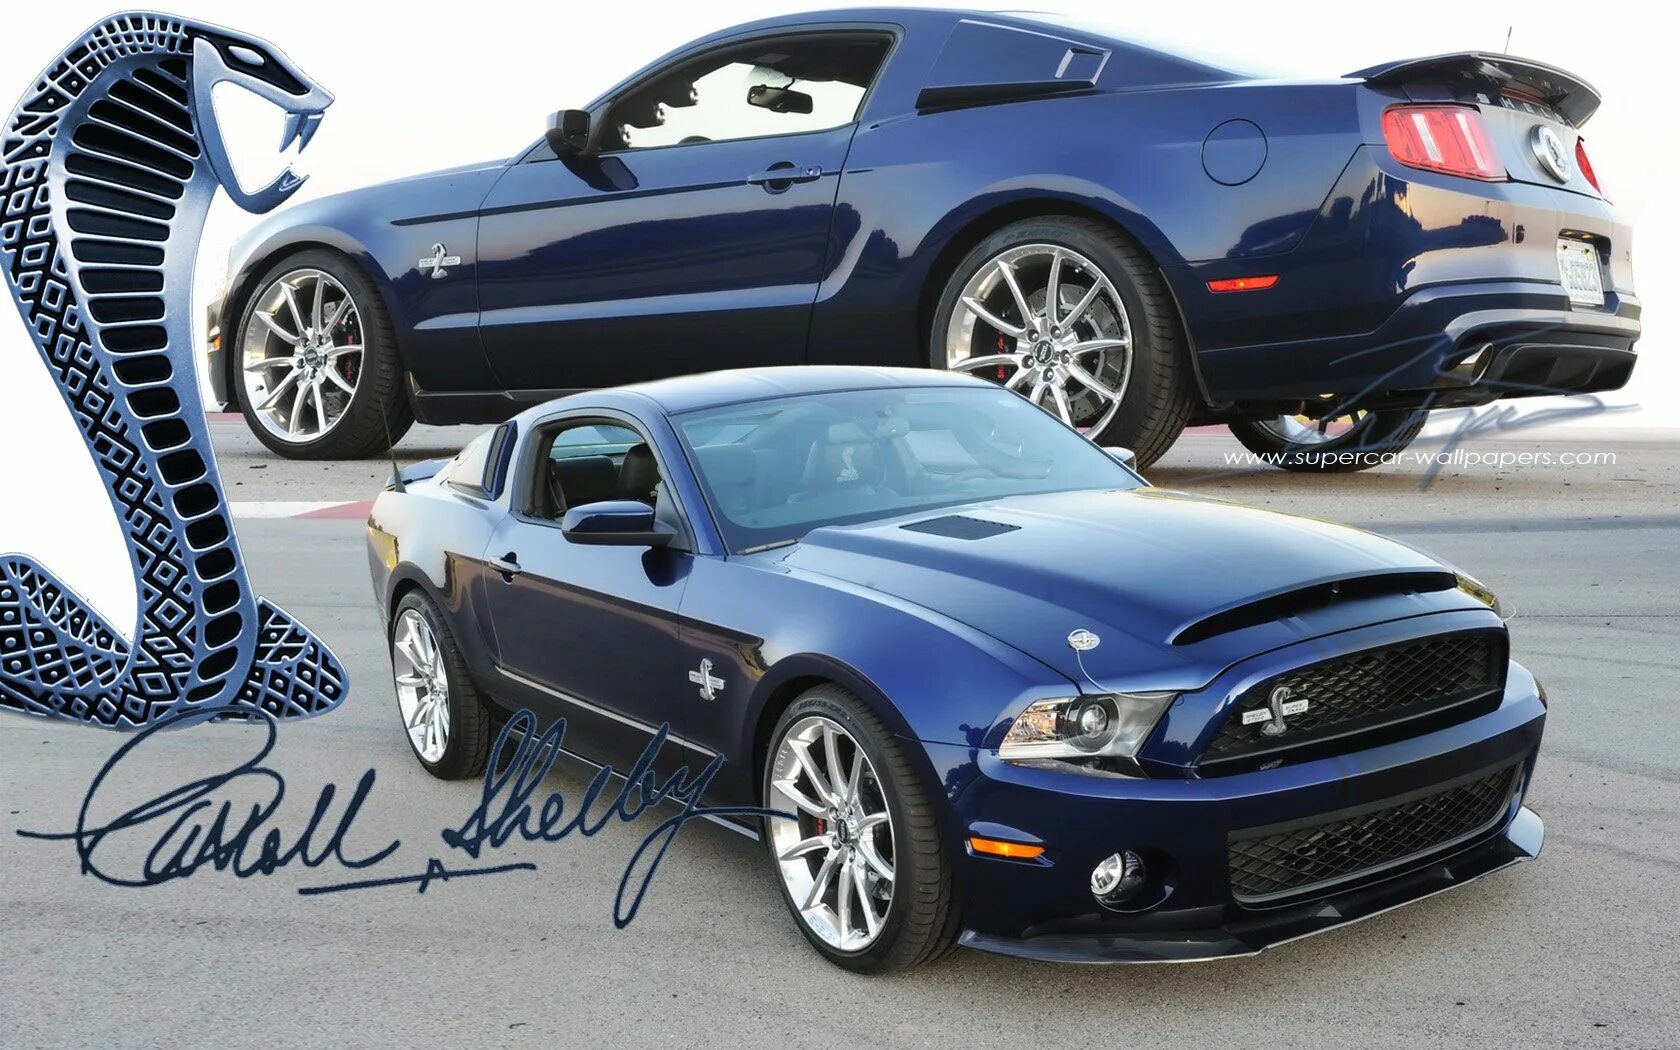 Cobra на русском. Ford Mustang Shelby Cobra gt500. Форд Мустанг Кобра 2015. Ford Mustang Shelby gt500 2015. Форд Шелби Кобра gt 500.